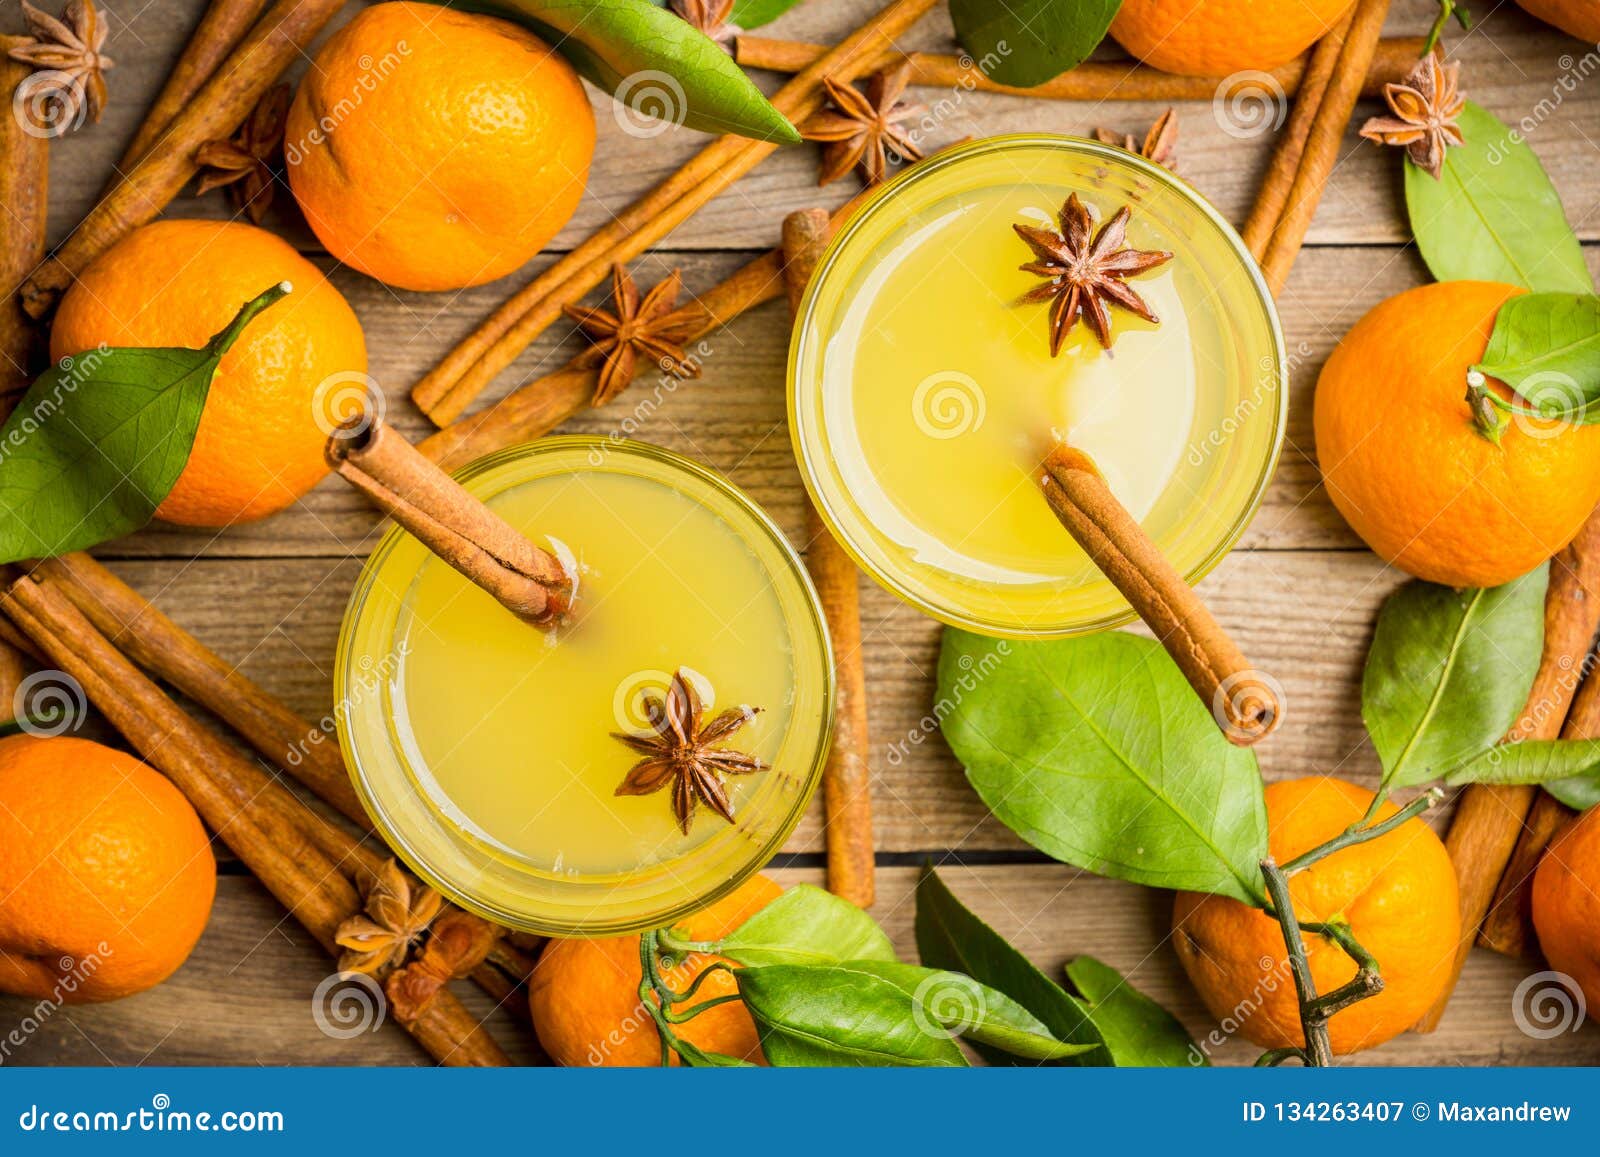 Old Fashioned Citrus Beverage with Spices Stock Image - Image of ...